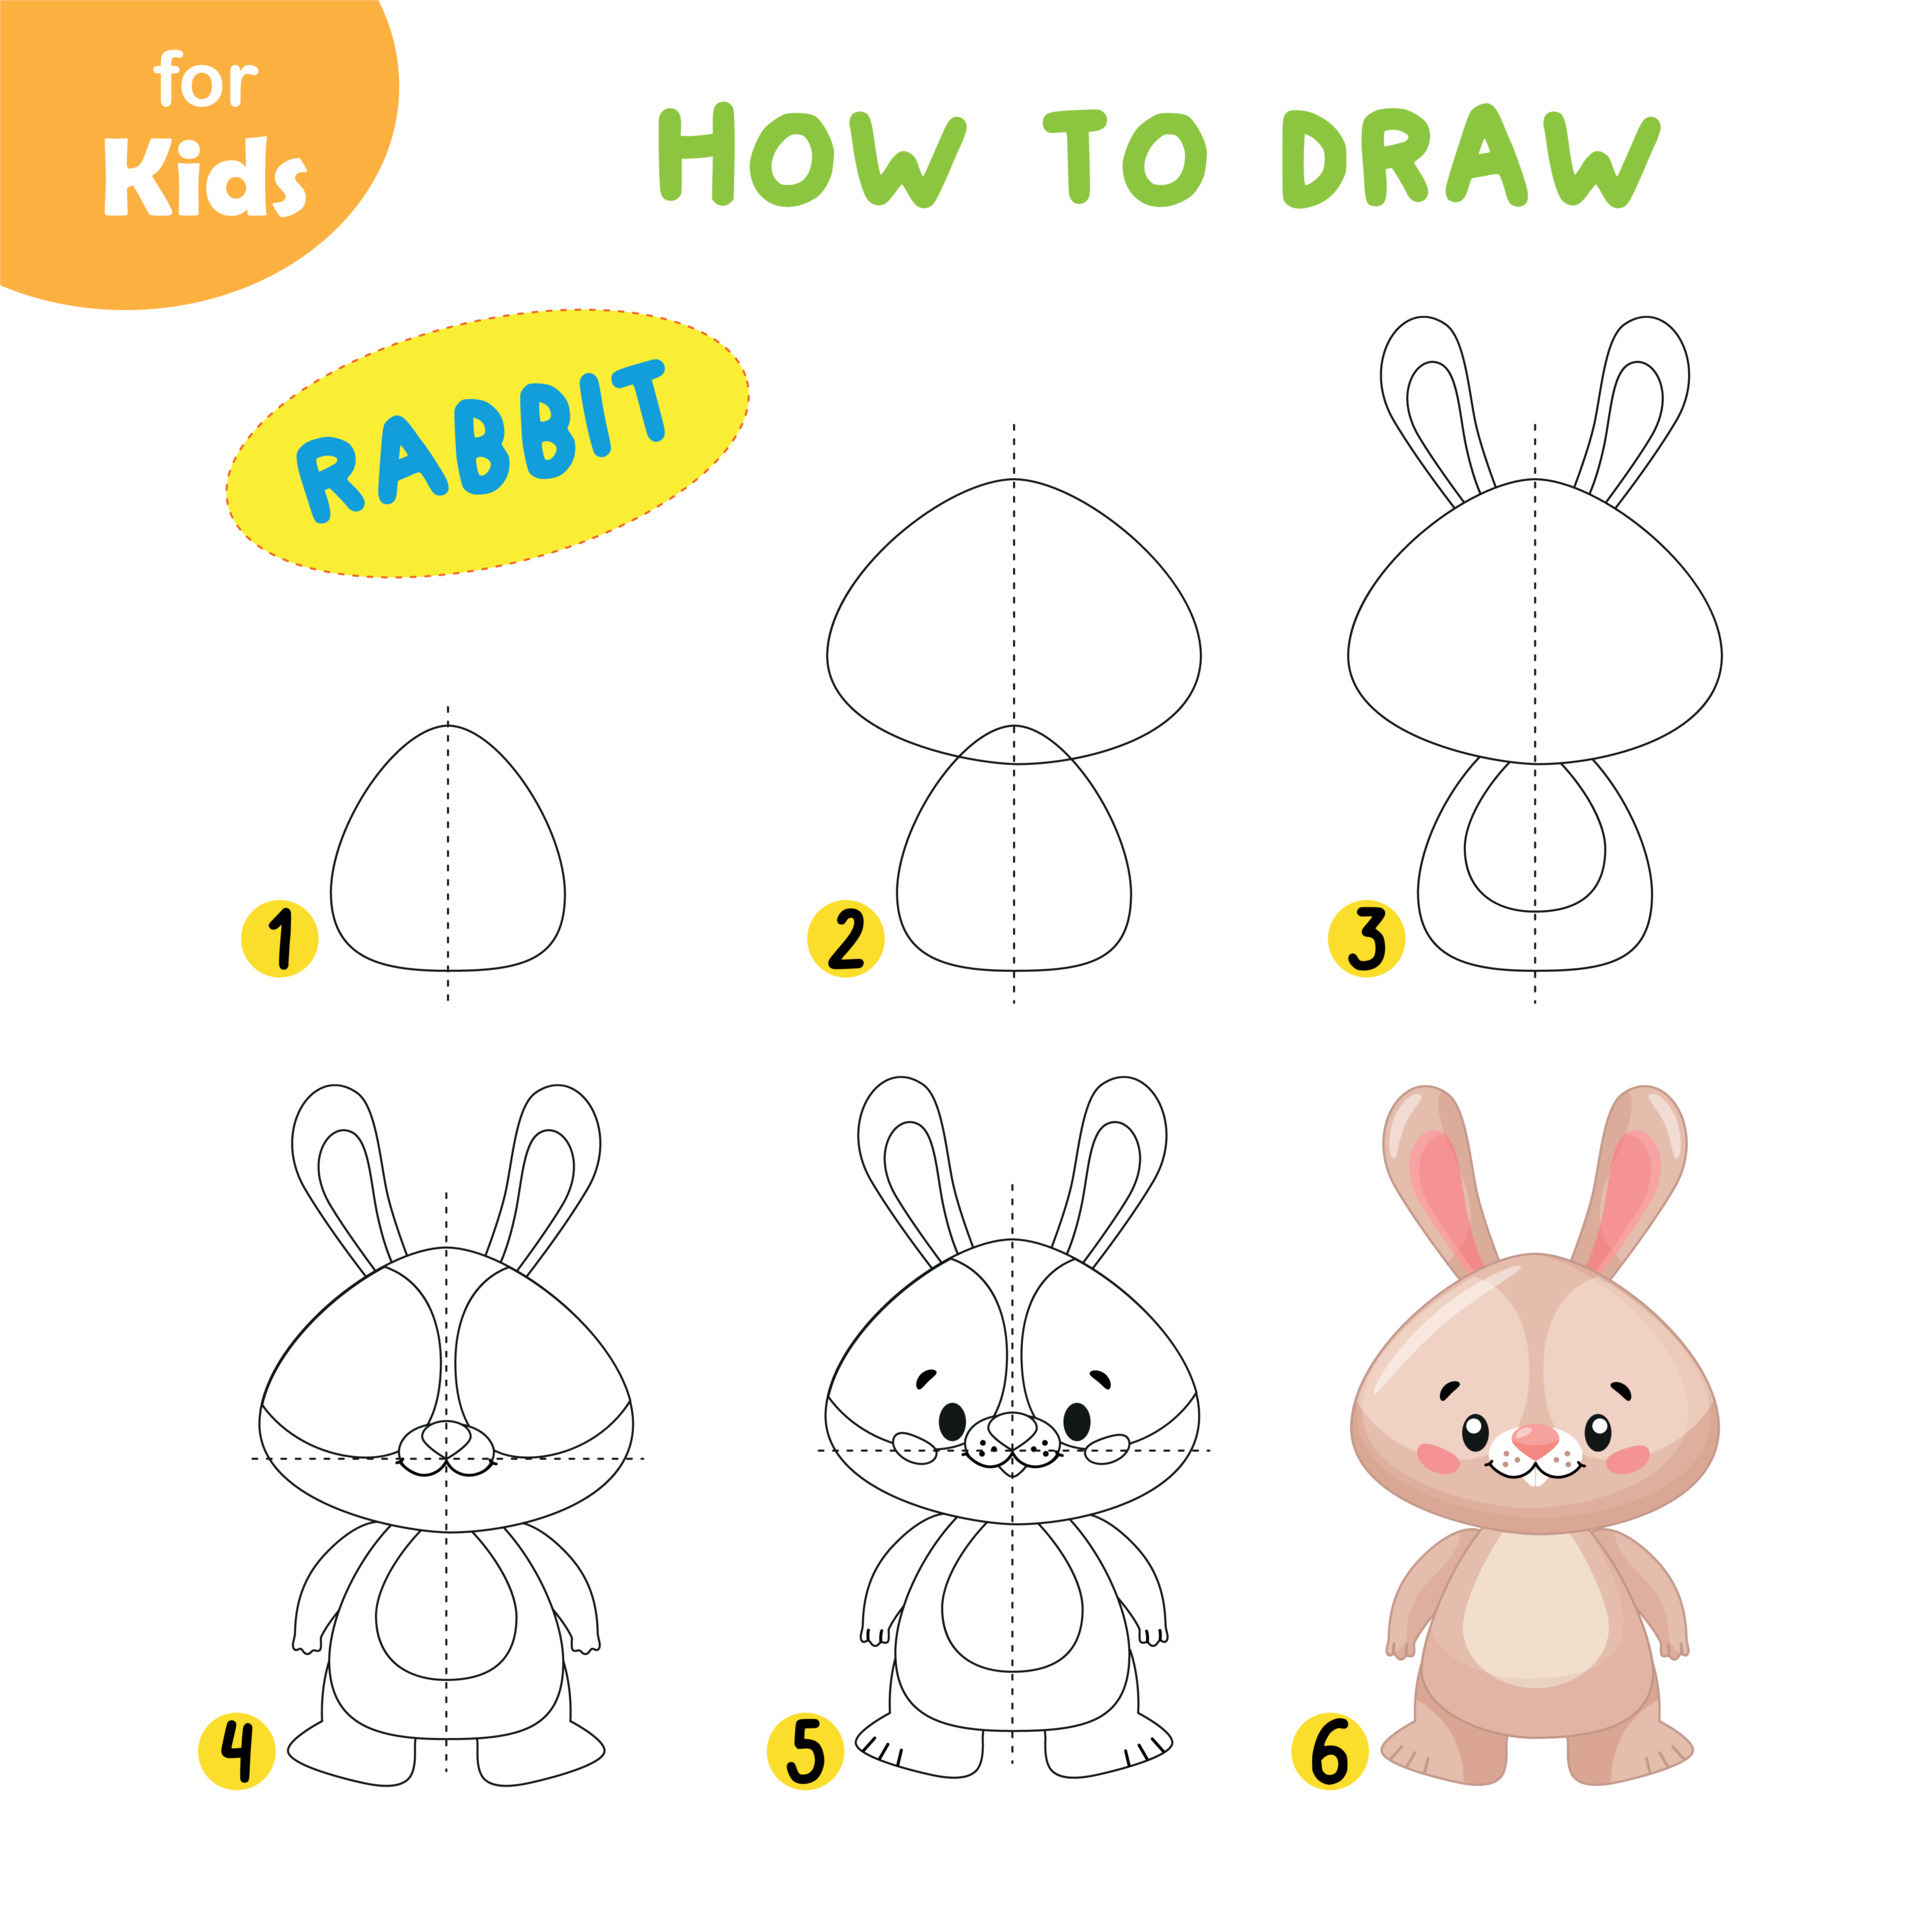 How To Draw A Cute Rabbit Step By Step. Drawing For Children, Learning. A  Simple Picture Of A Rabbit For Younger Children. Preparation For School. A  Series Of Drawings Of Cute Animals.